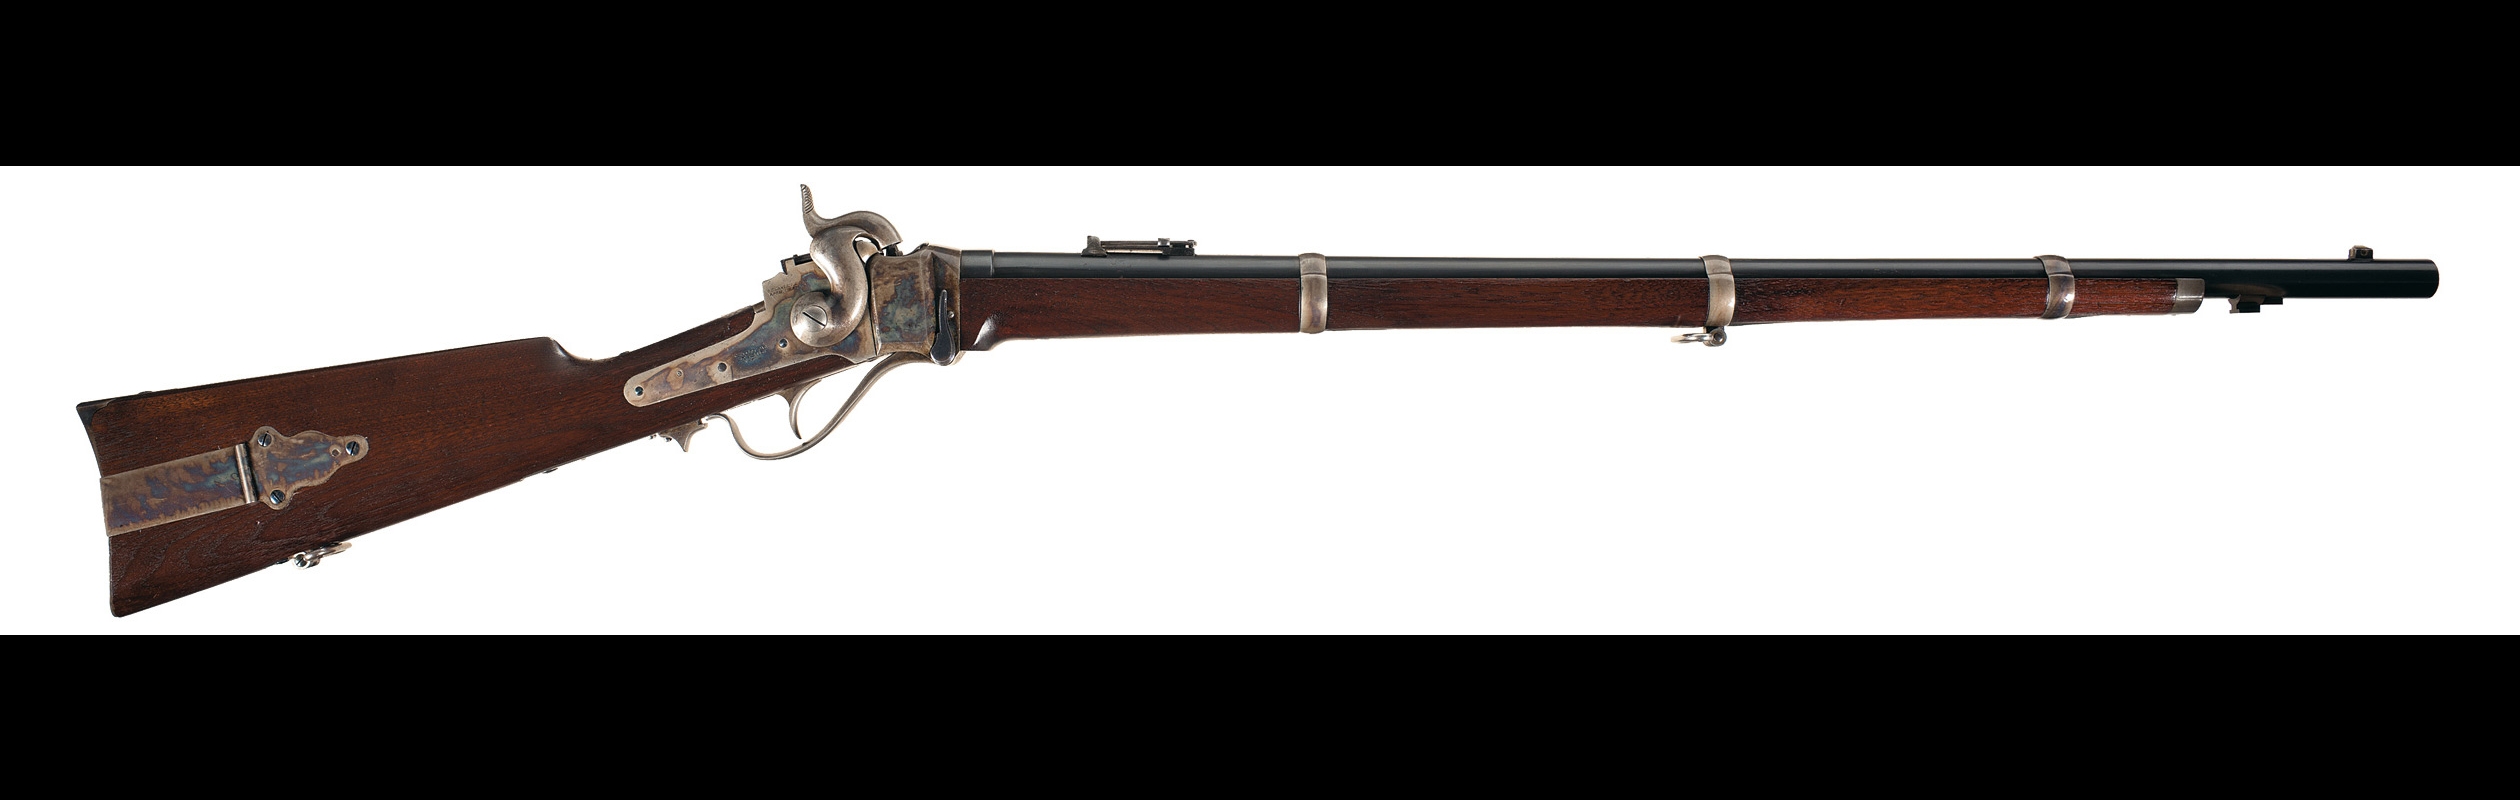 Sharps 1863 Rifle Backgrounds on Wallpapers Vista